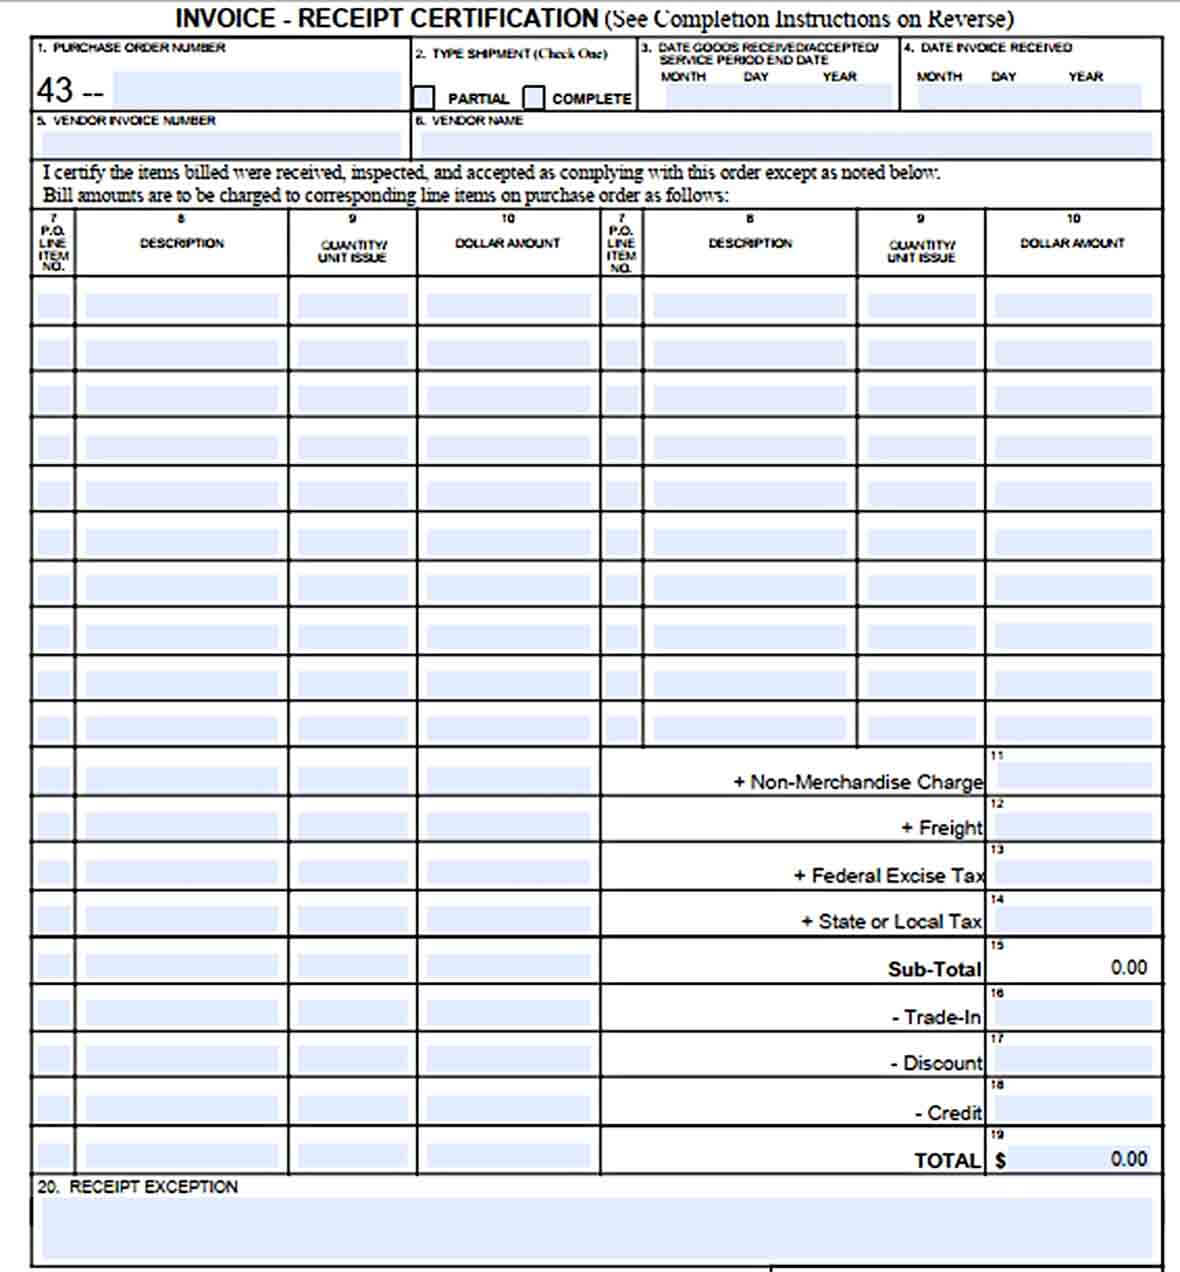 Blank Invoice Receipt Certification Template